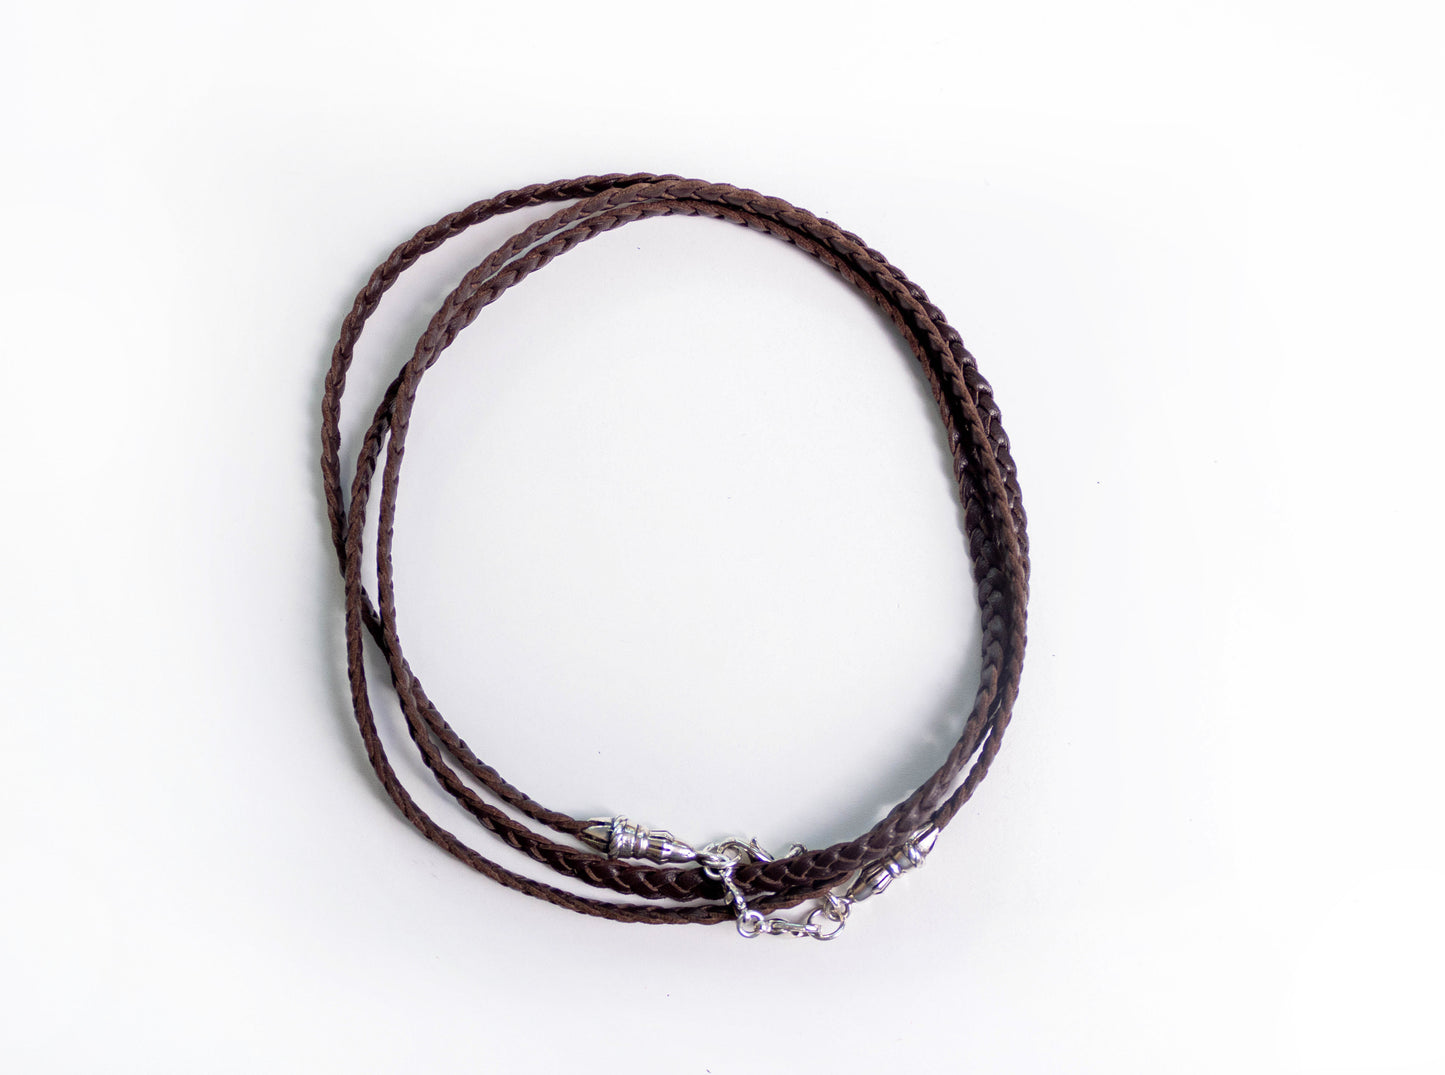 Luxurious Bracelet/Crossbody/Necklace in 925 Sterling Silver & Genuine Leather three double strands braided by hand, Brown or Black.- P14